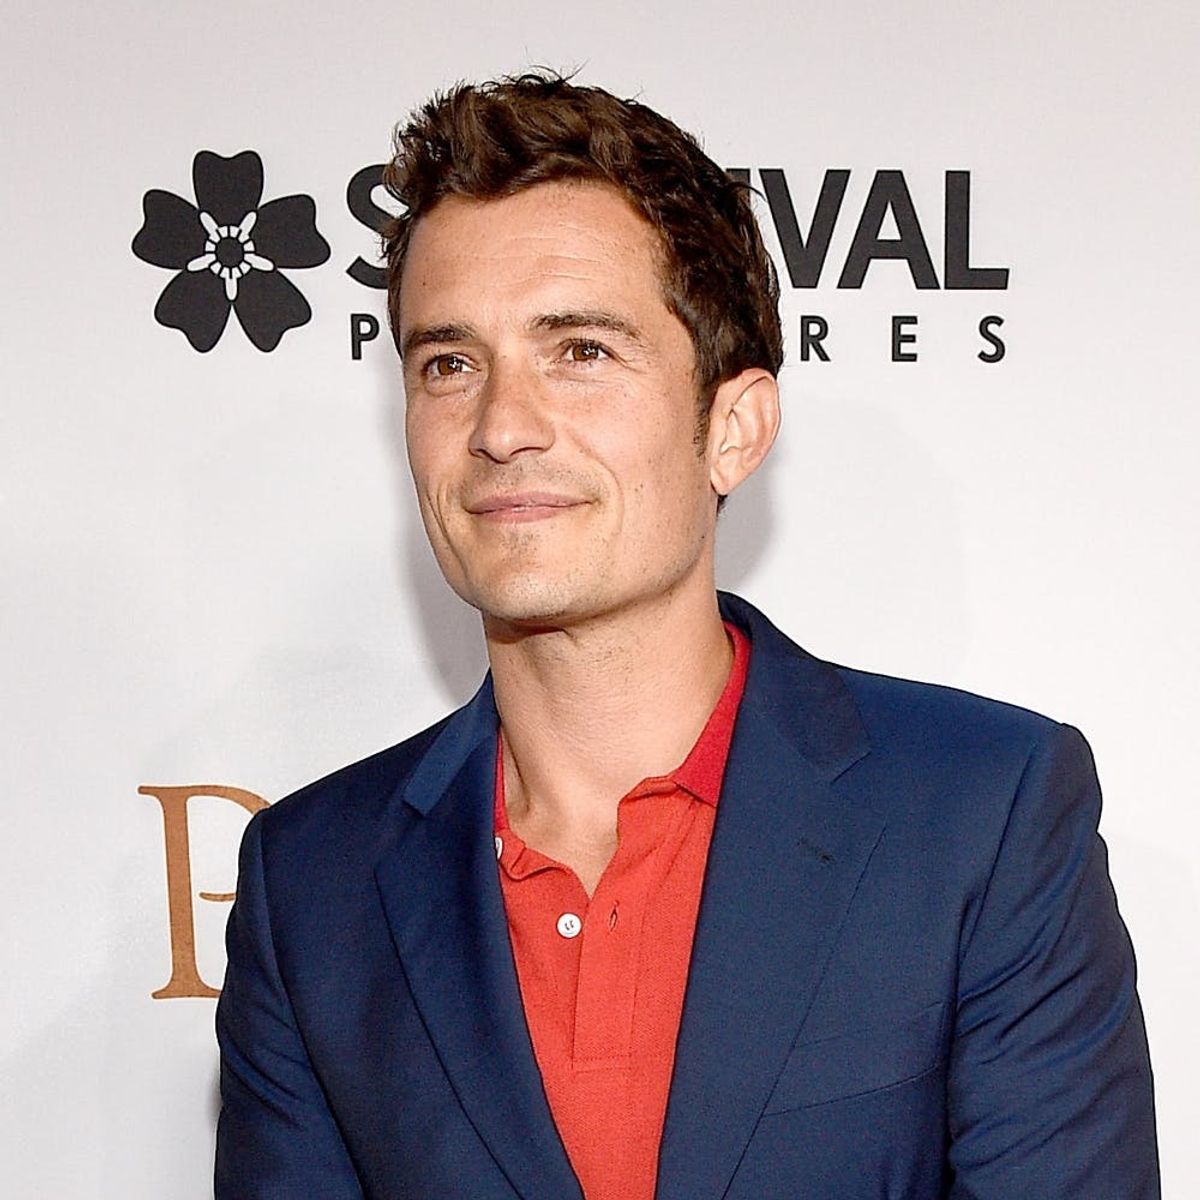 Orlando Bloom May Now Regret His Nude Pics for an Unexpected Reason